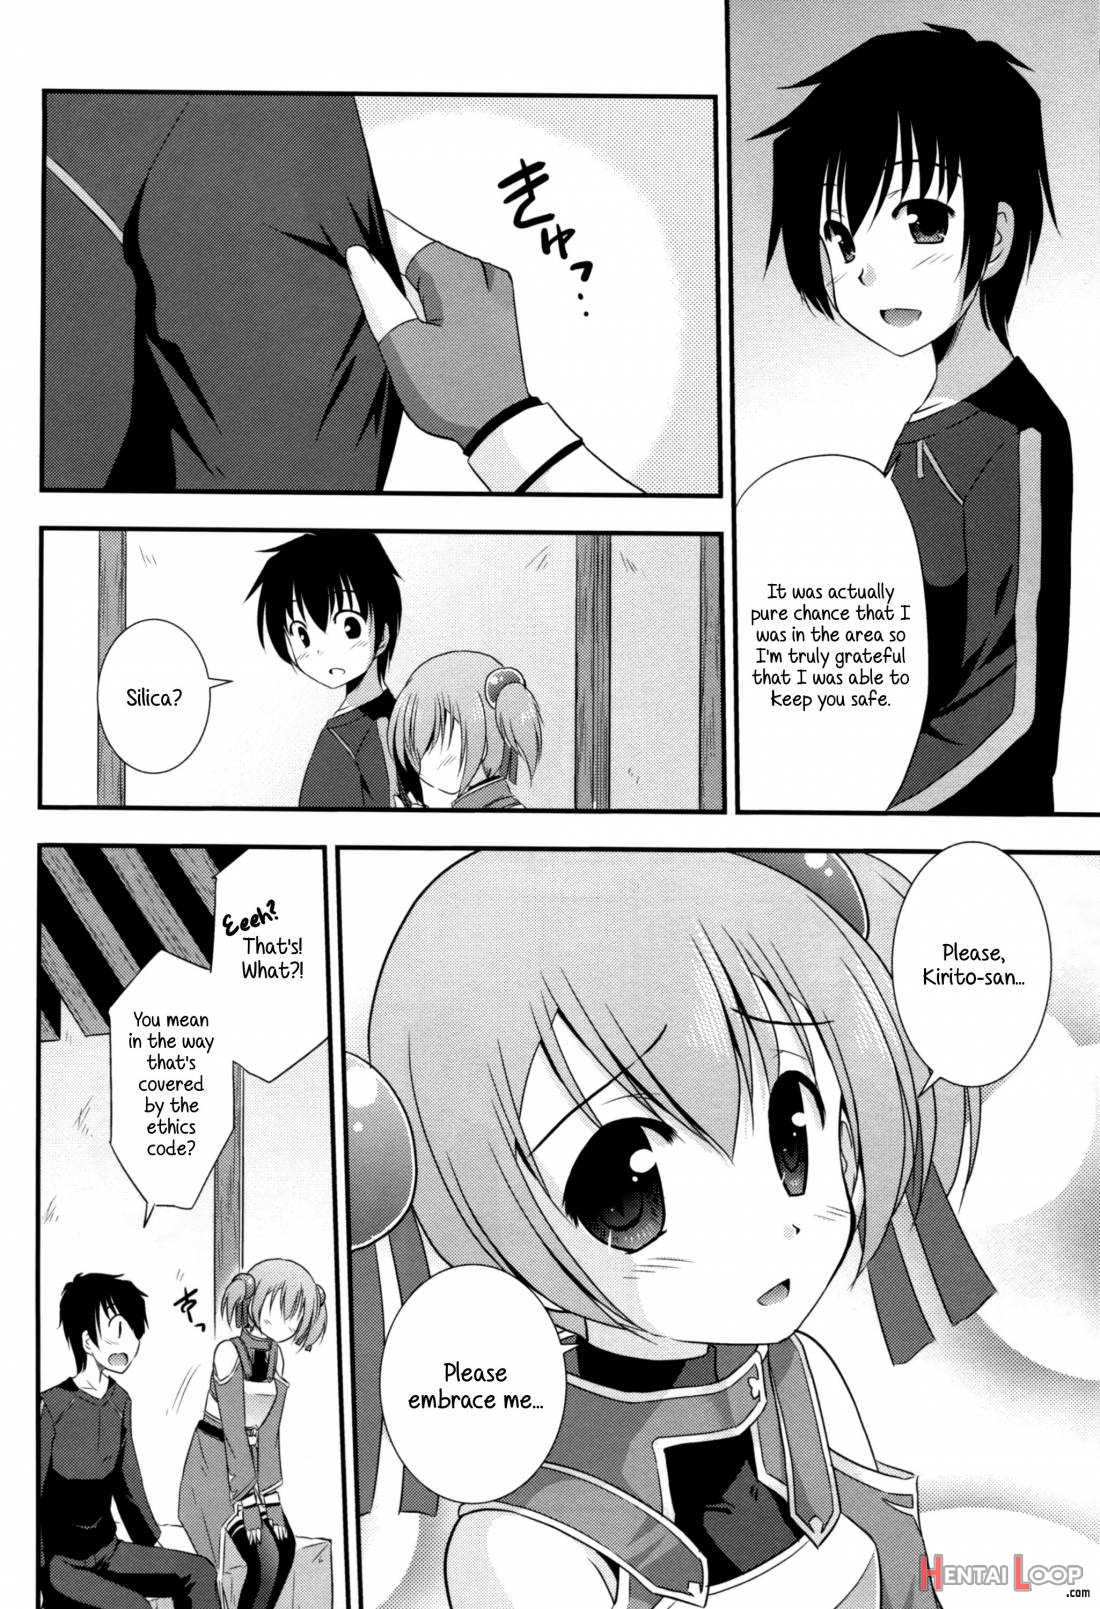 Silica Route Online page 10